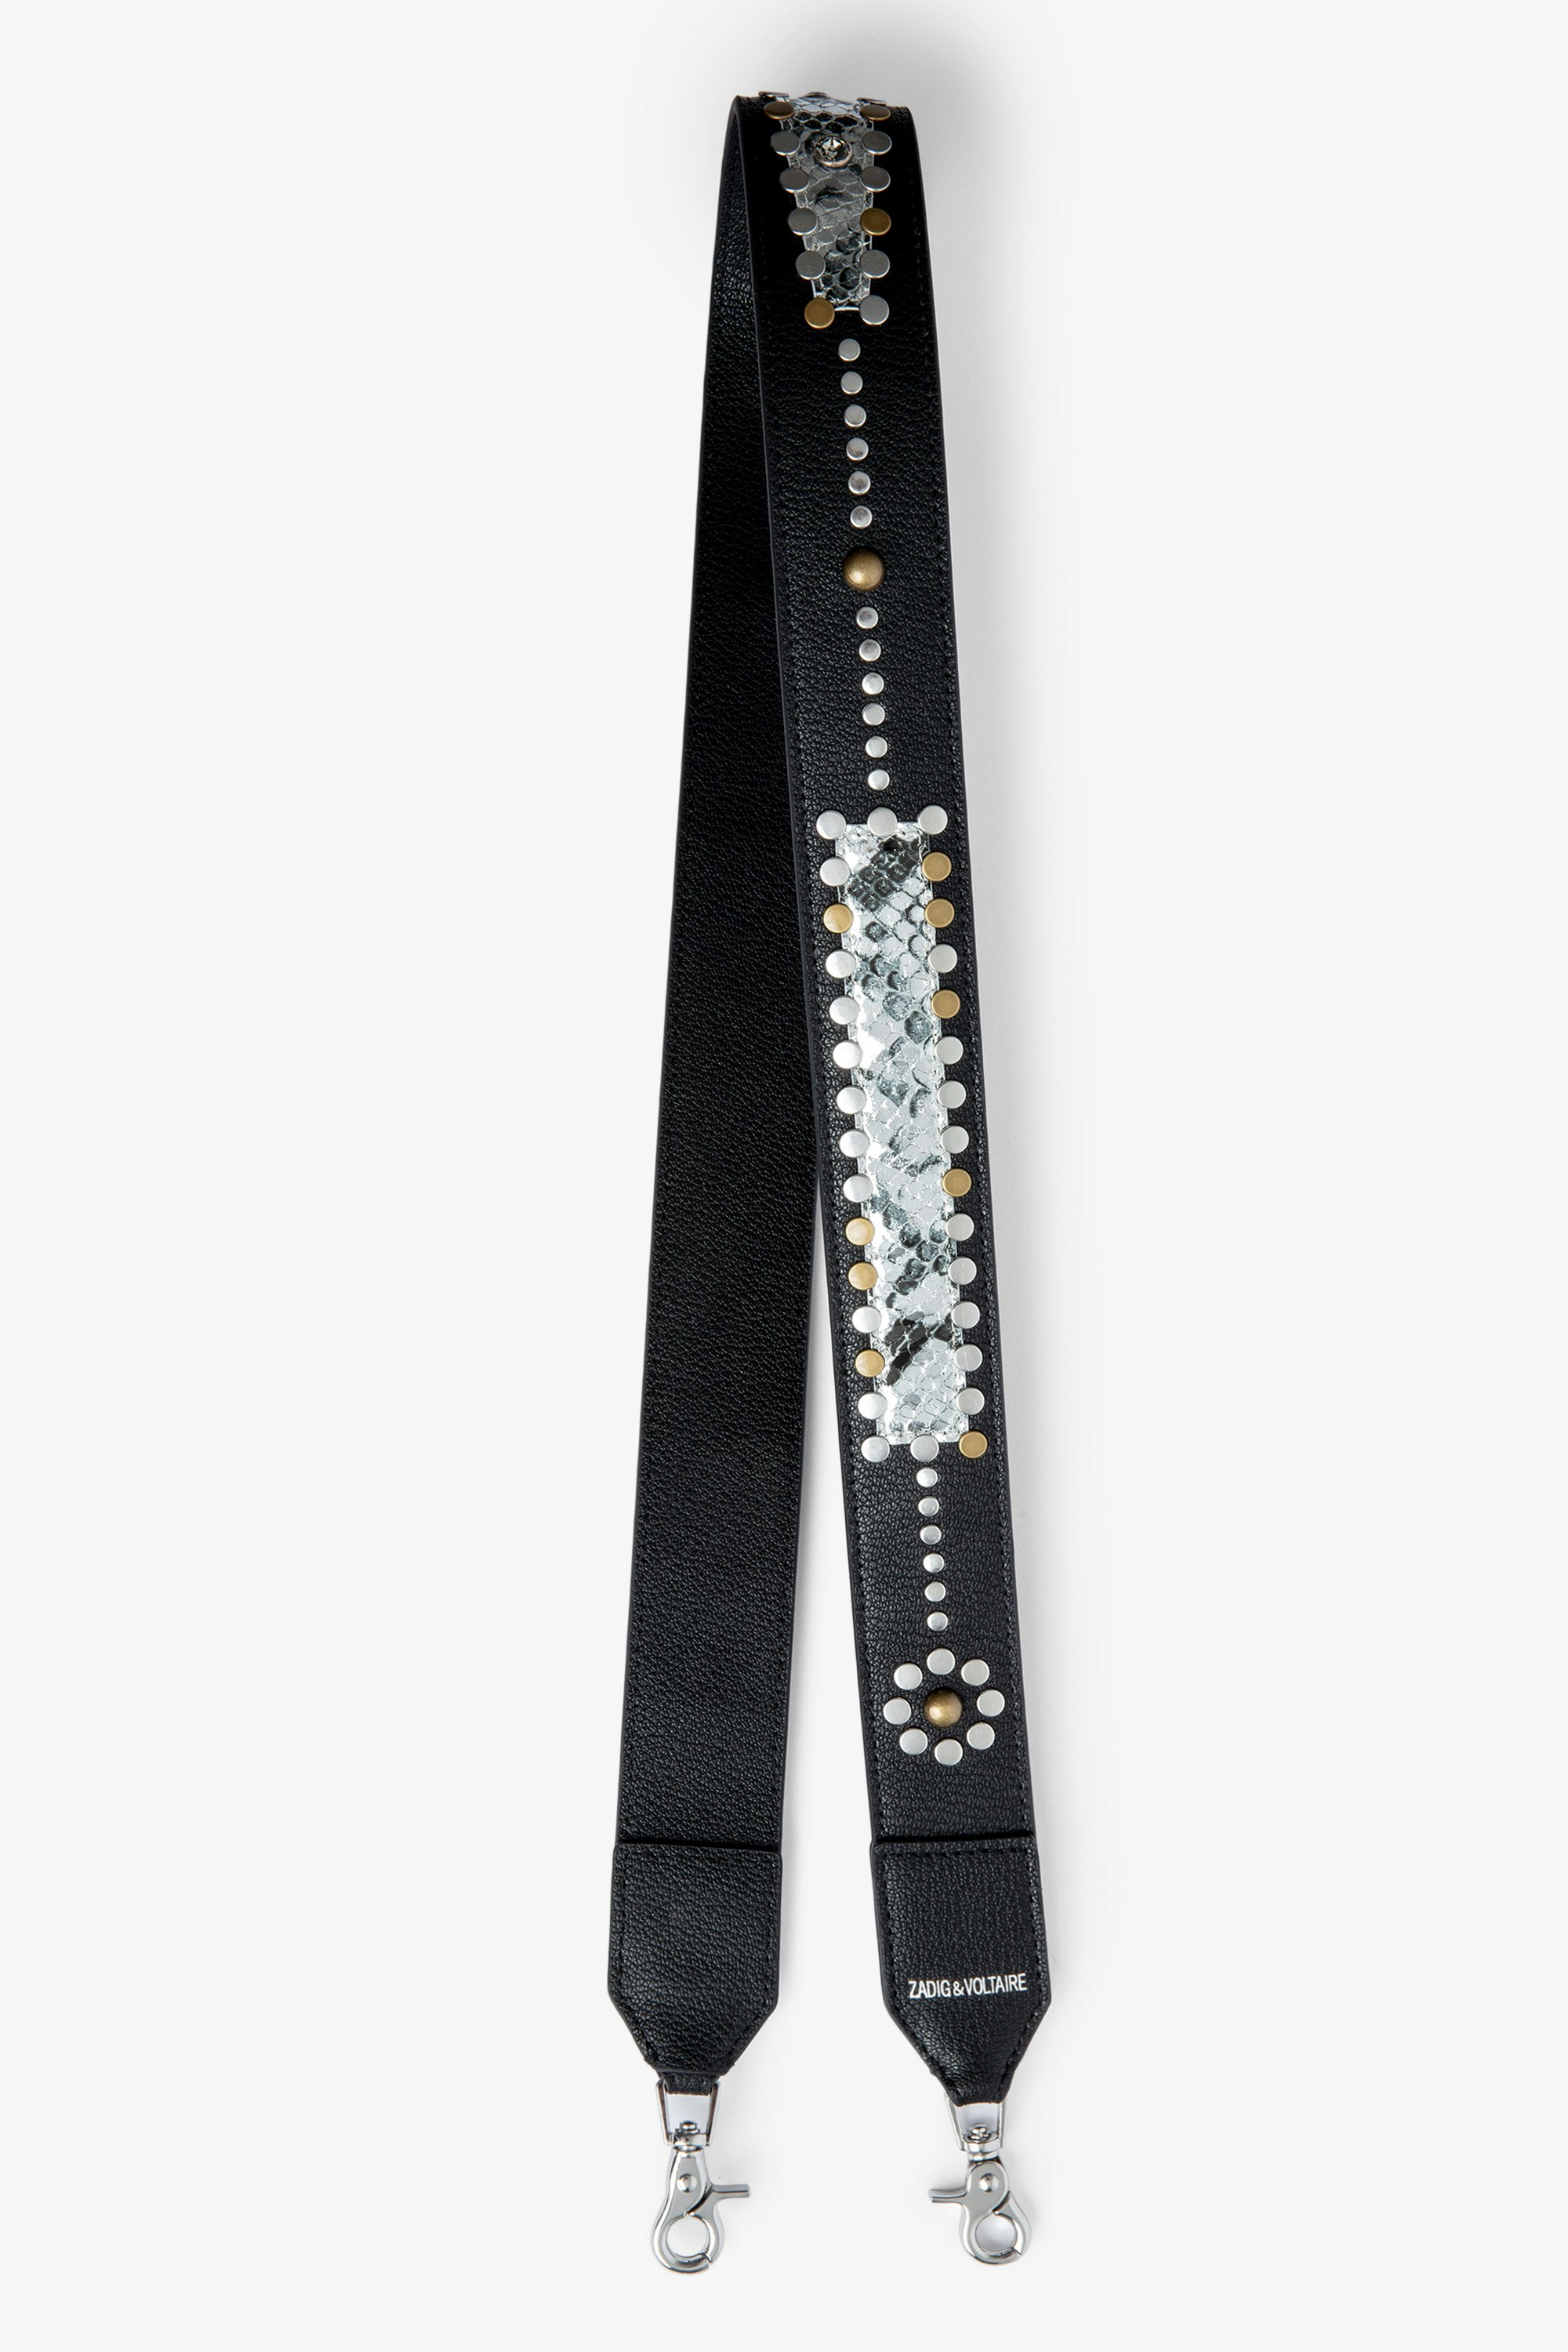 Wild Shoulder Strap Women’s black grained leather shoulder strap with rivets and python-embossed panels